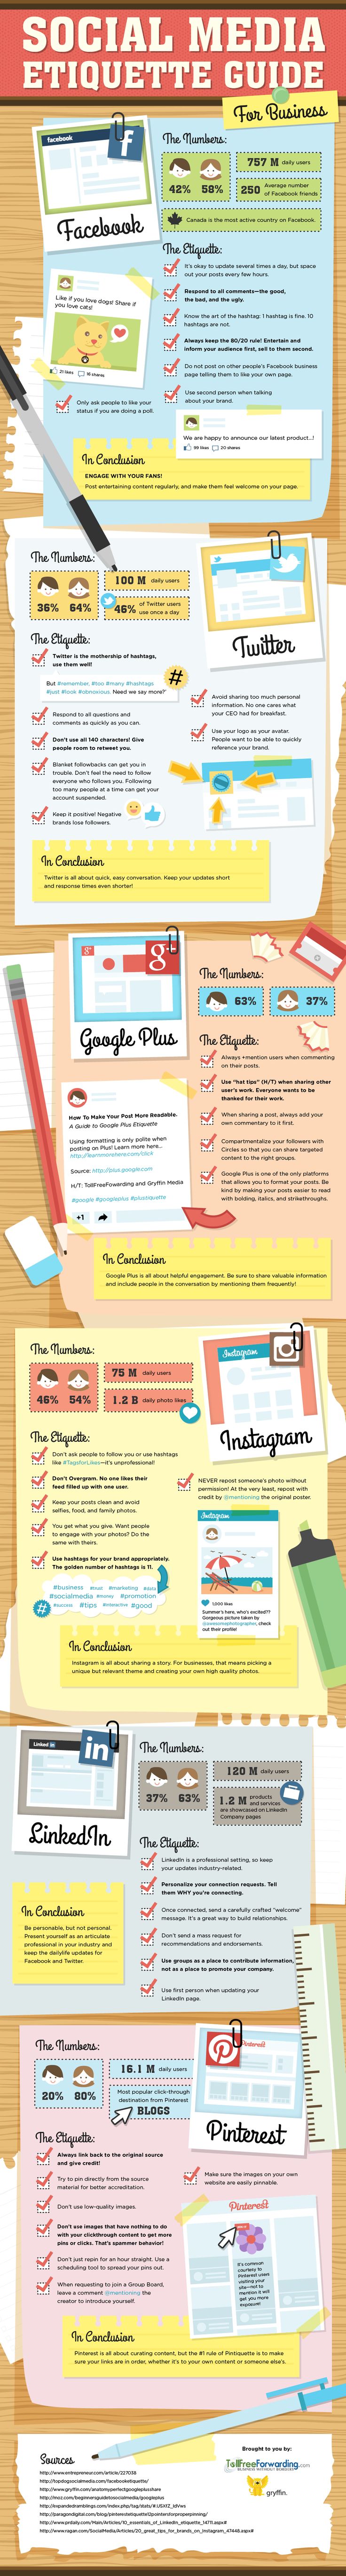 Marketing-Infographic-The-SocialMedia-Etiquette-Guide-To-Business-Infographic.-Are-you-being-your Marketing Infographic : The #SocialMedia Etiquette Guide To #Business (Infographic).  Are you being your...